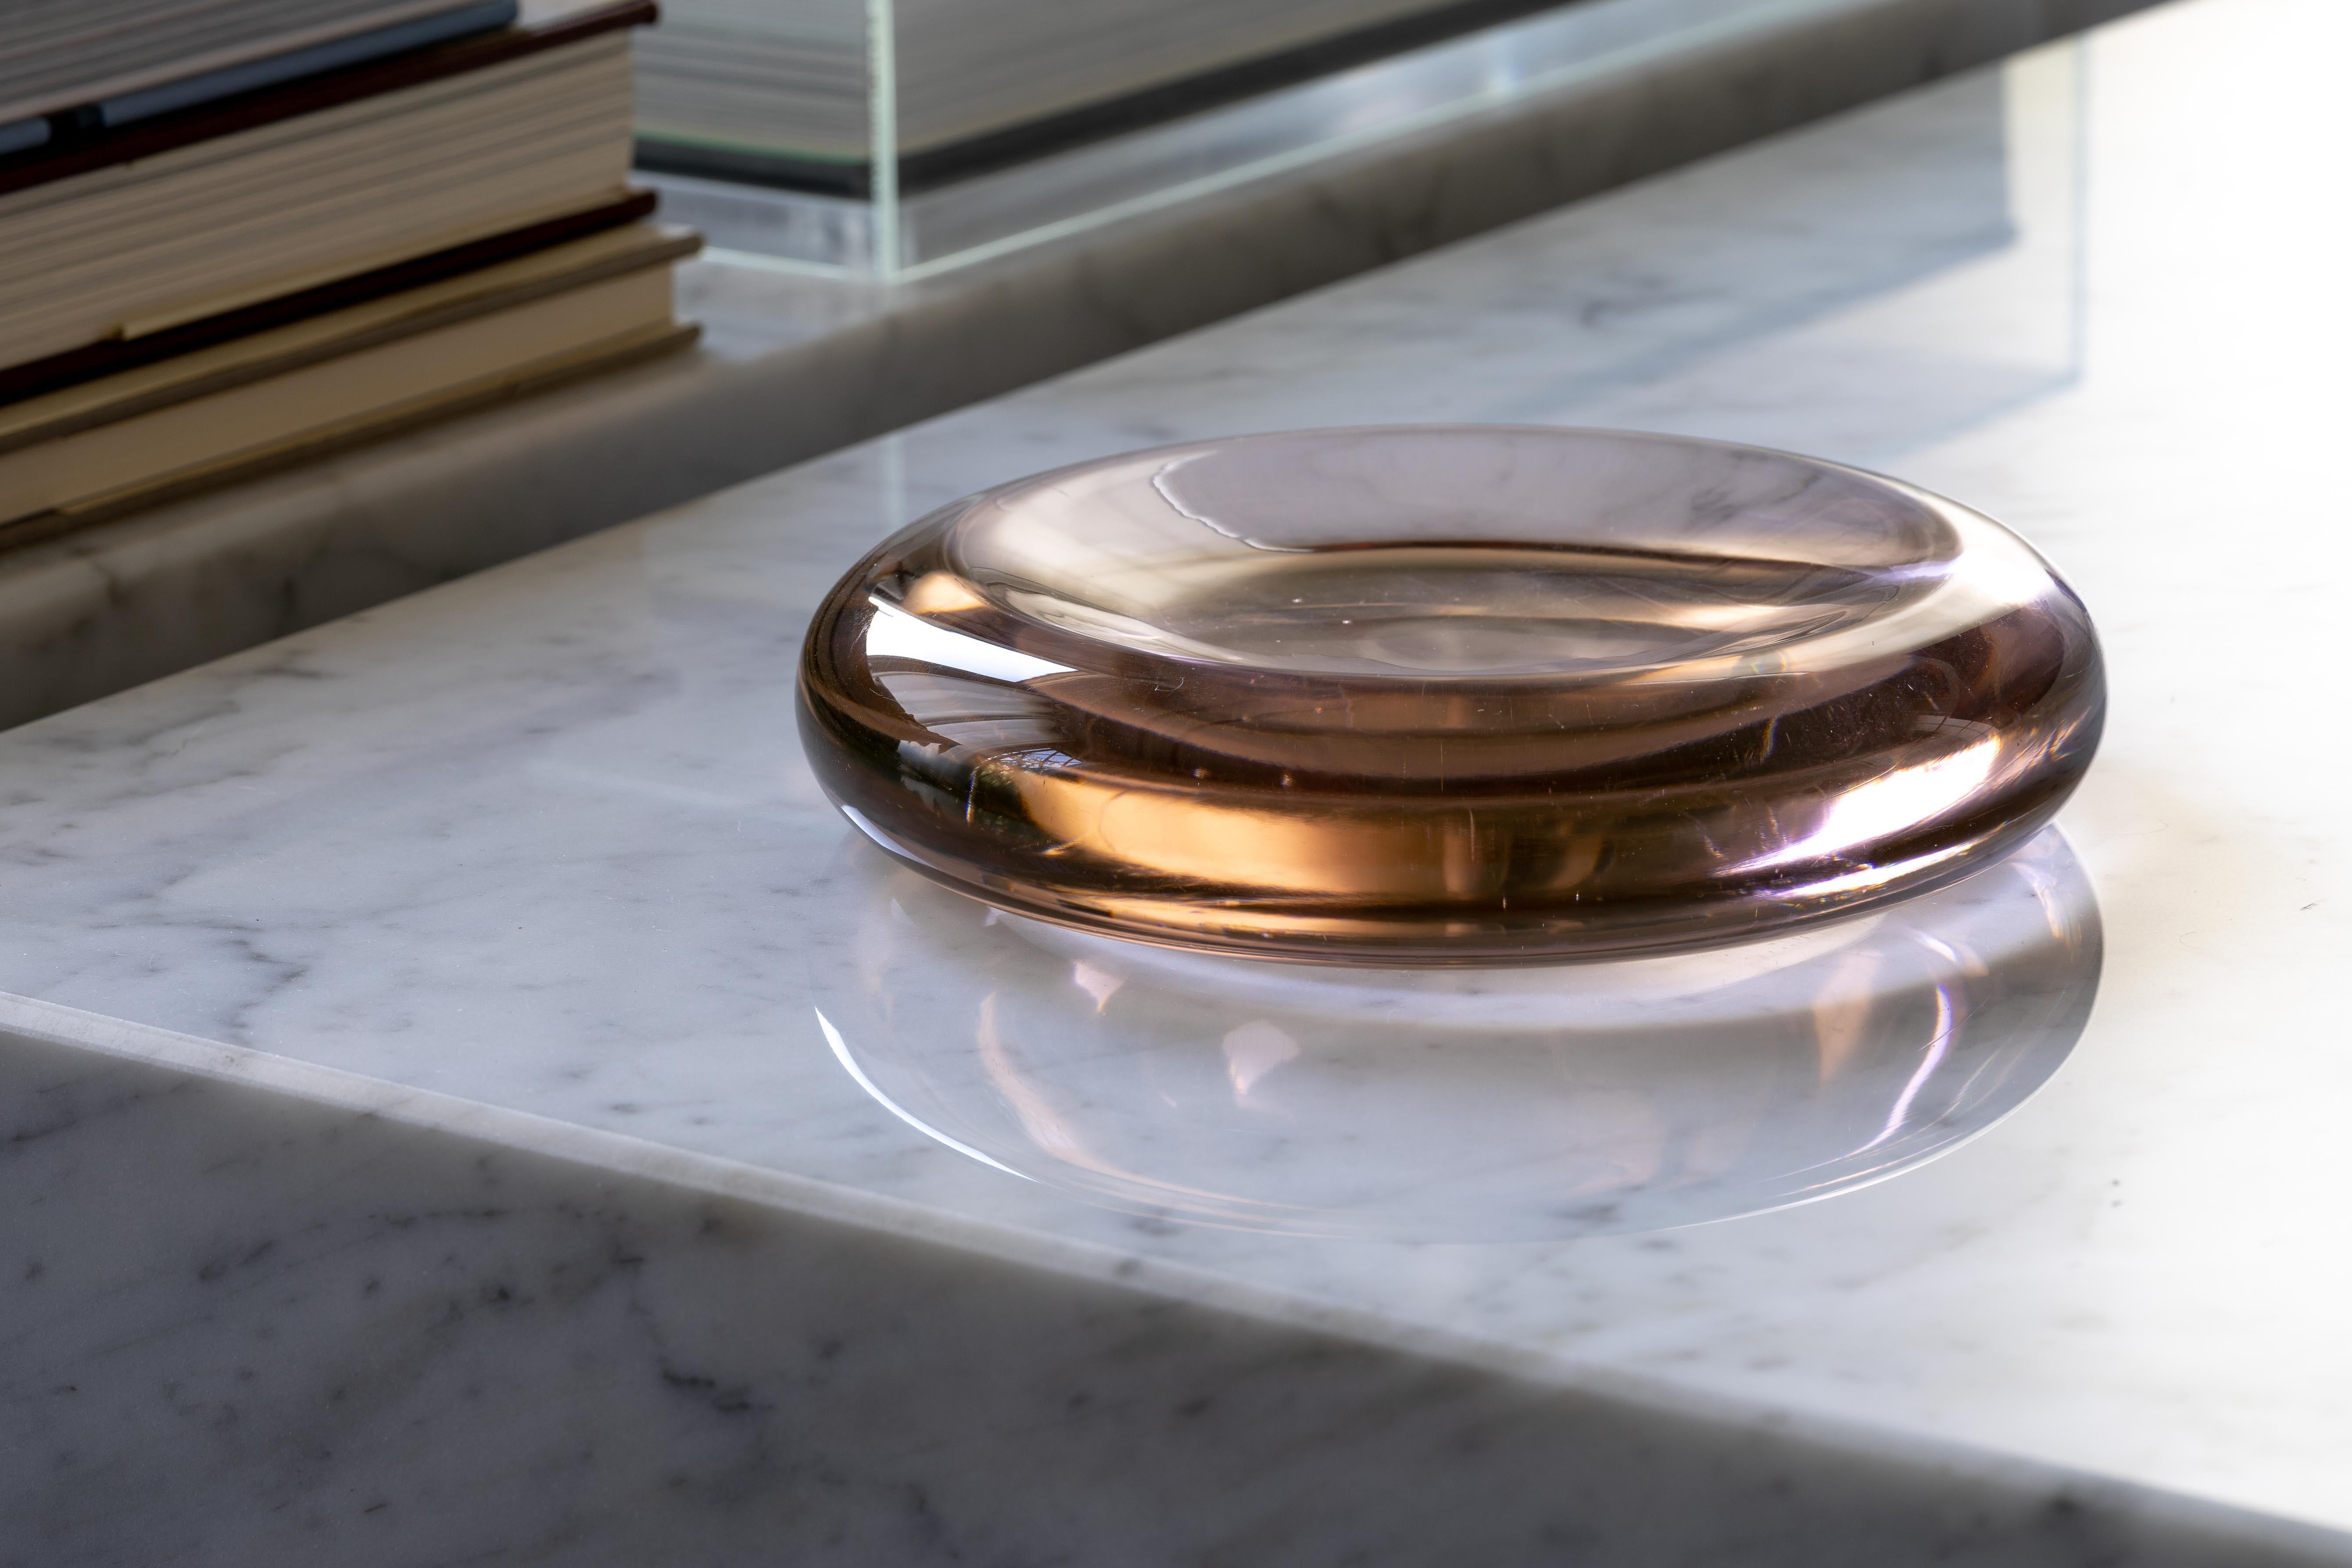 A lovely pale pink or blush-colored blown glass dish by Salviati & Co. from the mid-1980s. Typical of American designer Charles Pfister's work with the Murano-based firm, the smooth, polished dish resembles an oversized lozenge that appears to glow